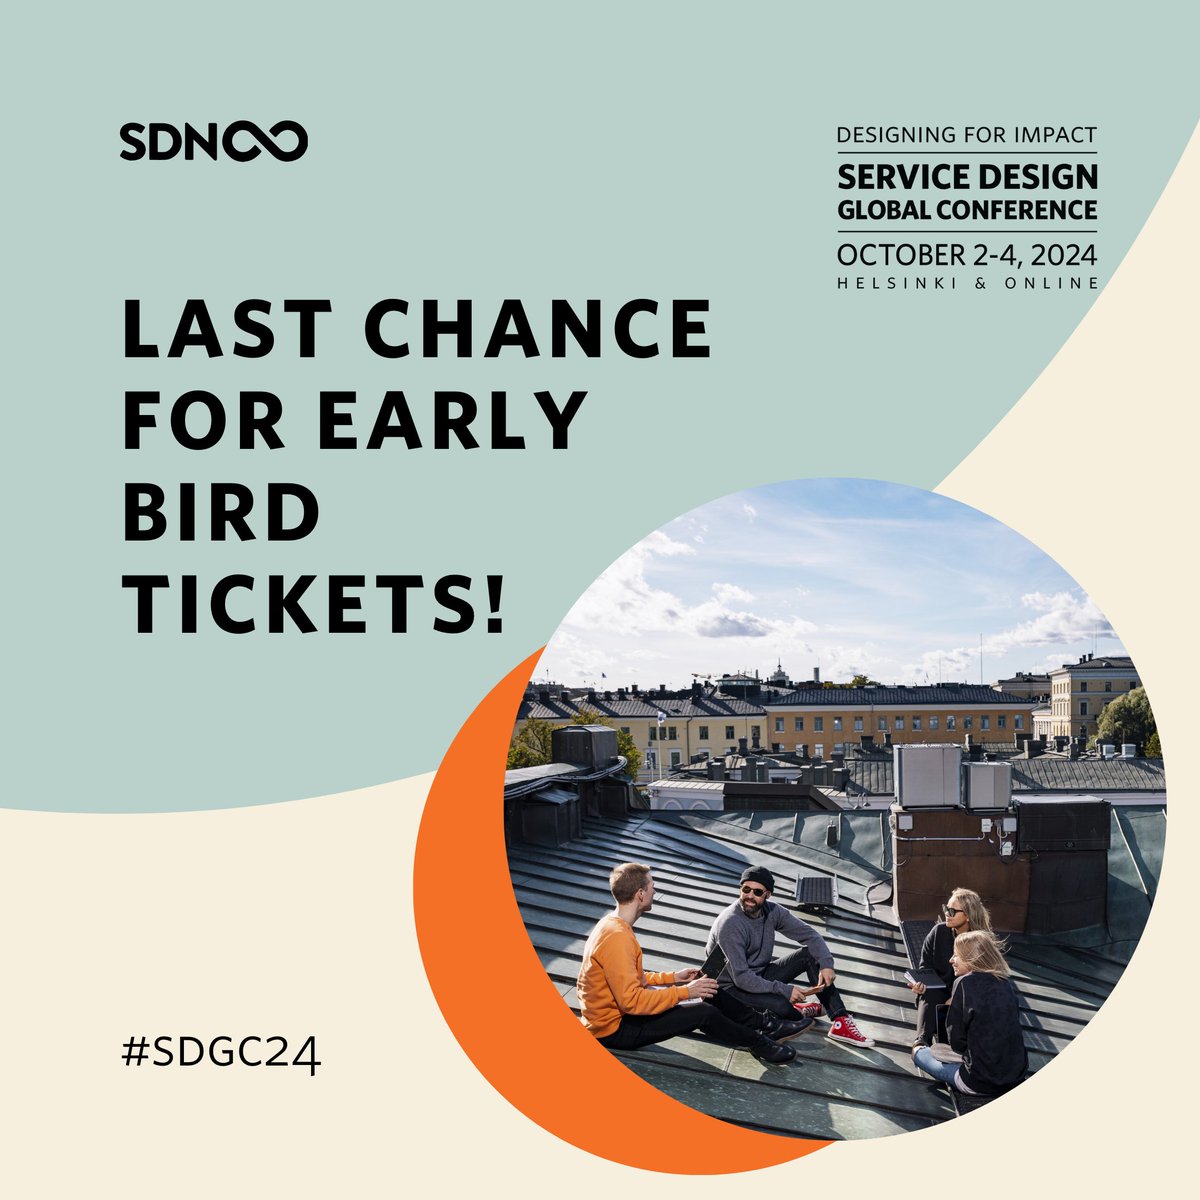 🐦There are still a few early bird tickets left before the last tickets run out or the offer ends on May 31. 👉 servicedesignglobalconference.com Photo Credits: Business as usual Jussi Hellsten / Helsinki Partners #SDGC24 #SDGC #ServiceDesign #DesignThinking #Design